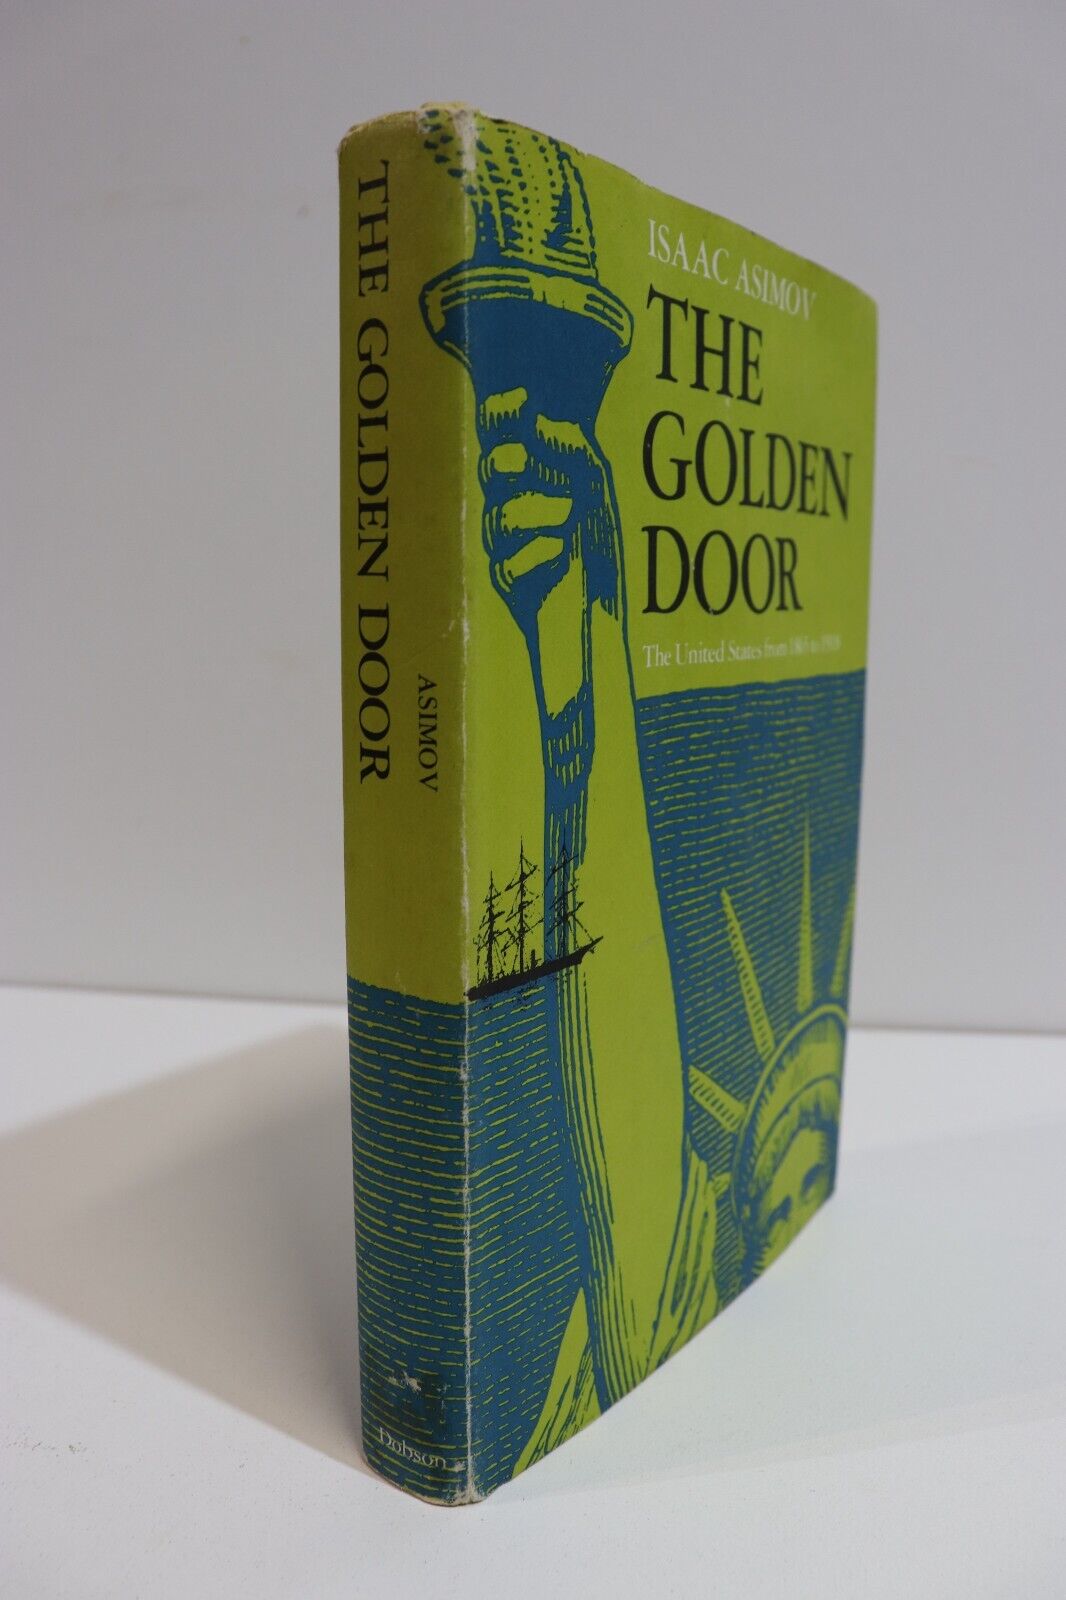 The Golden Door by Isaac Asimov - 1977 - Vintage American History Book